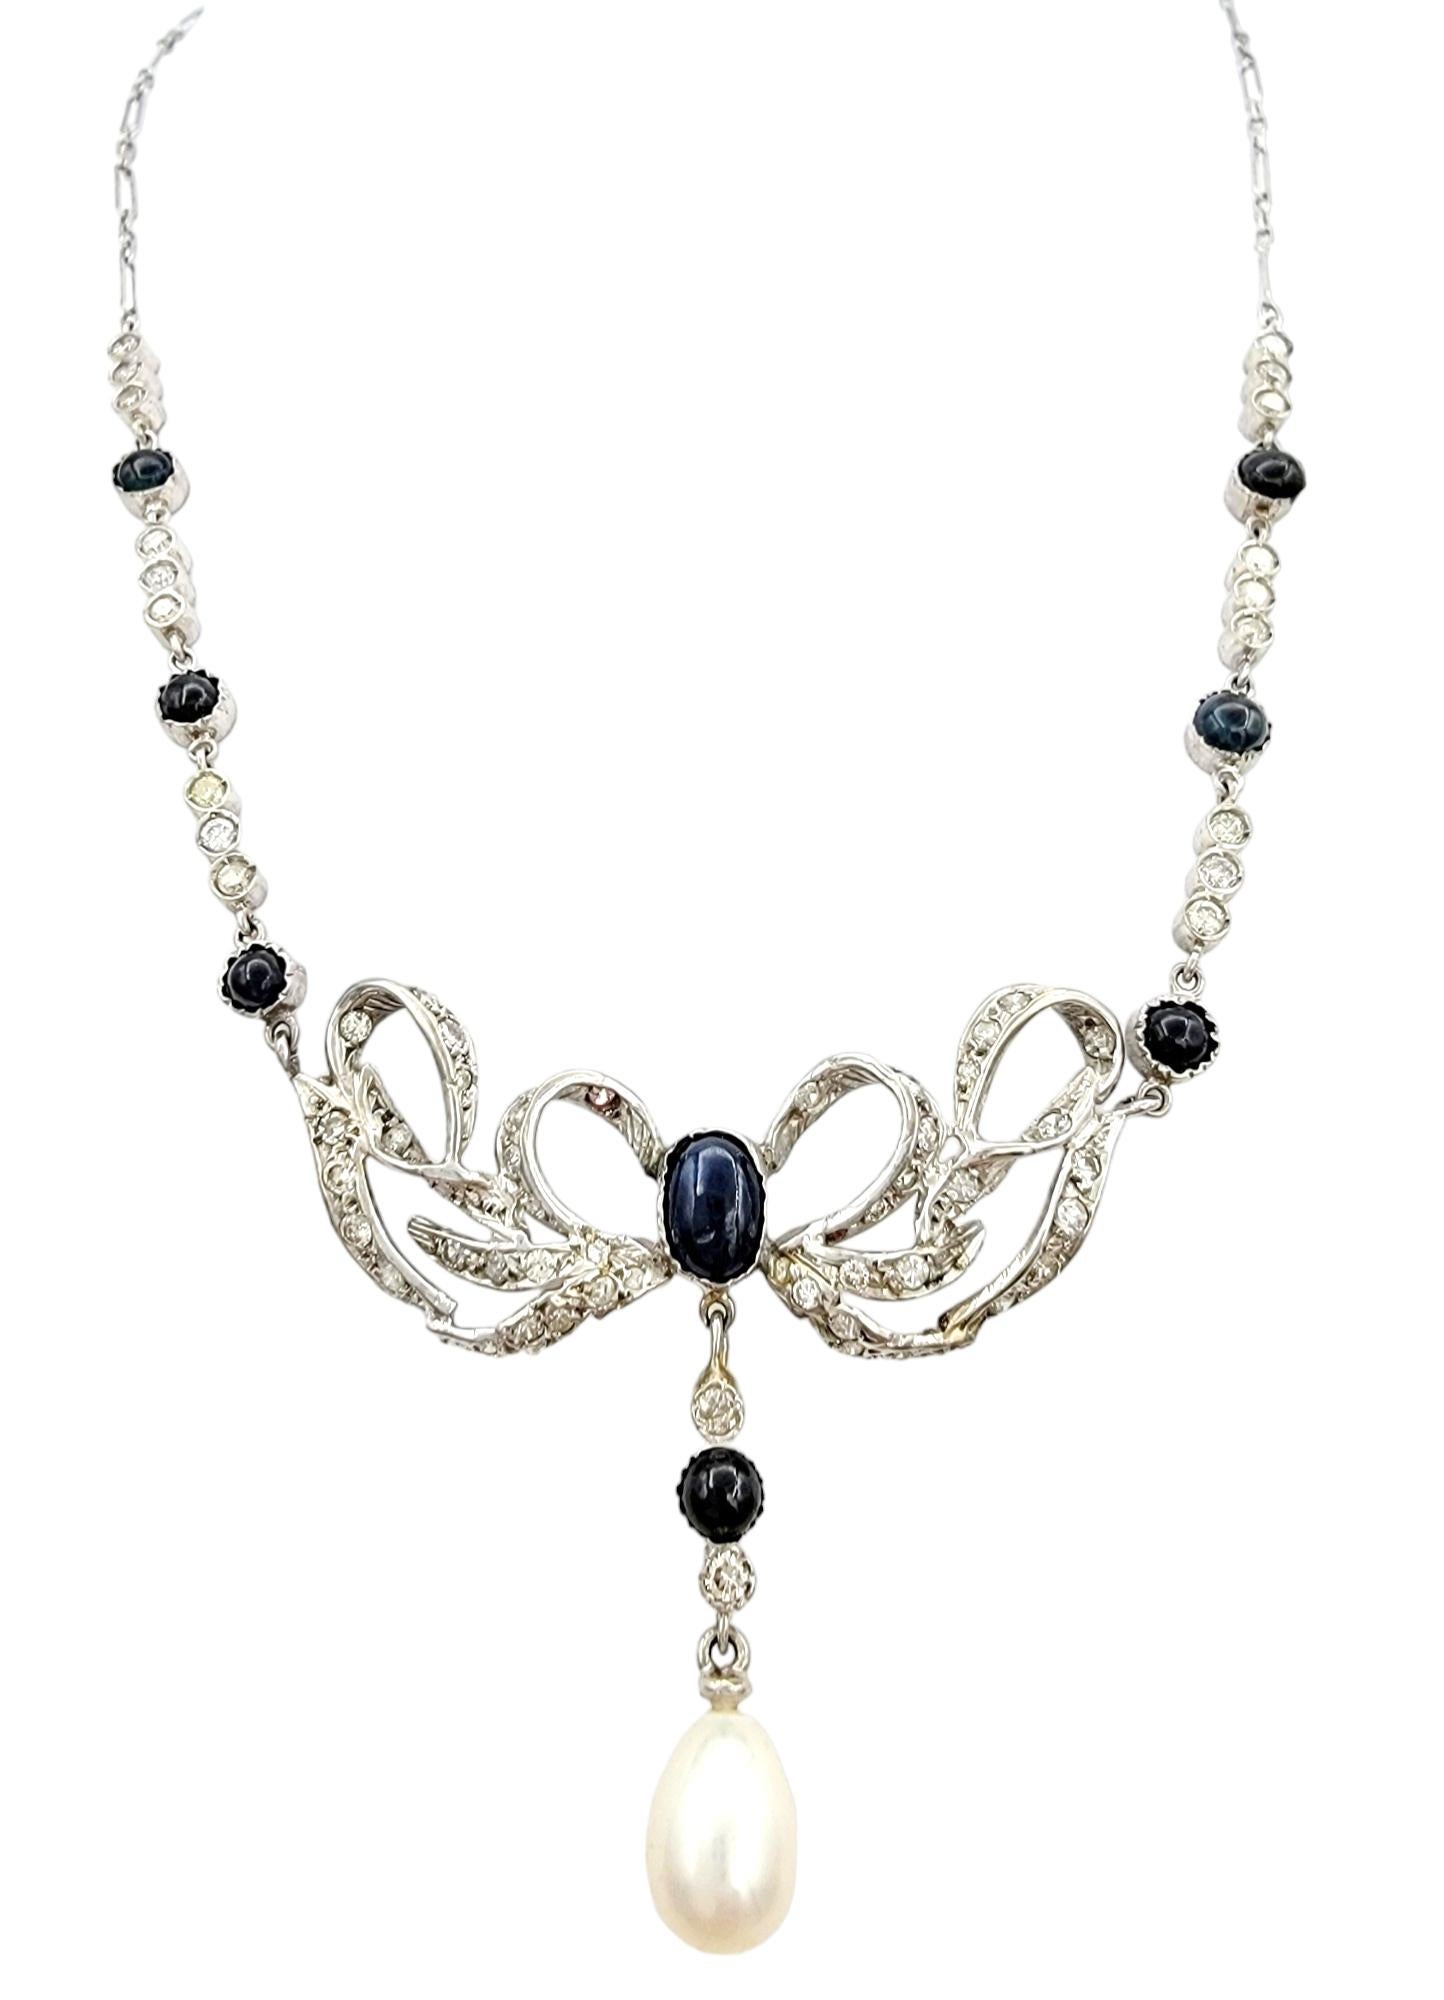 This vintage platinum pendant necklace is a masterpiece of elegance and sophistication, featuring a captivating arrangement of precious gemstones. The central bow designed pendant is adorned with lustrous cabochon sapphires, which adds a rich and